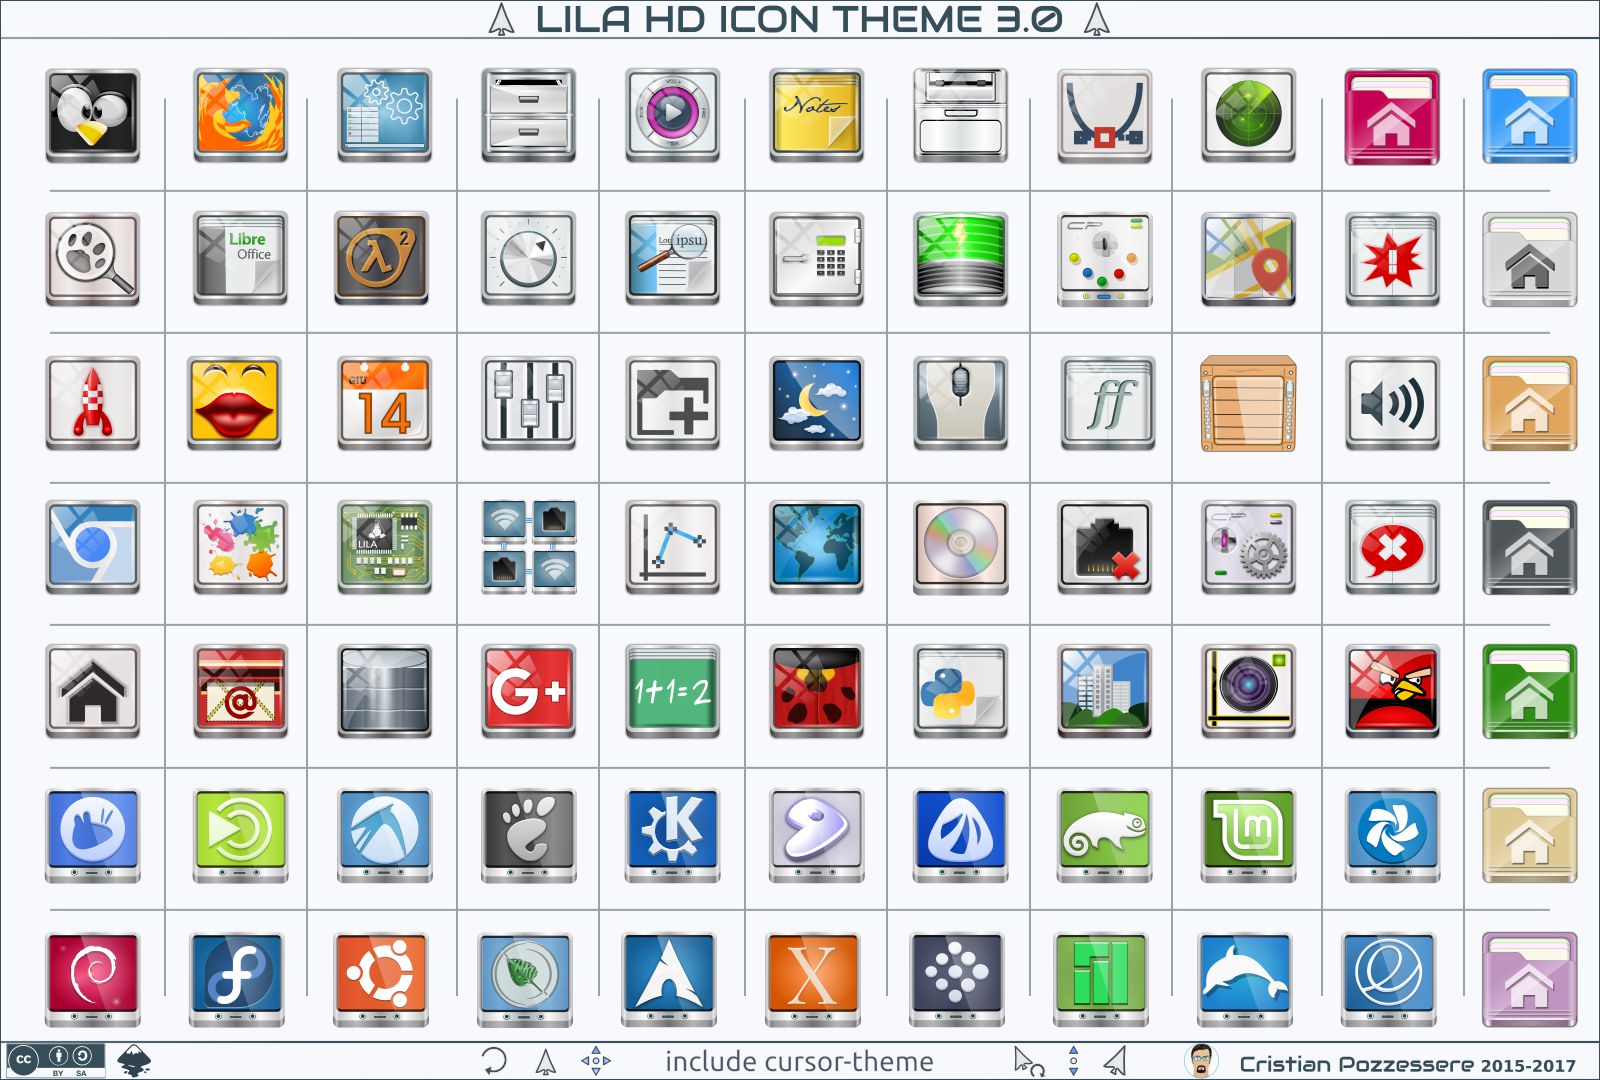 Windows 10 icon and theme package for linux